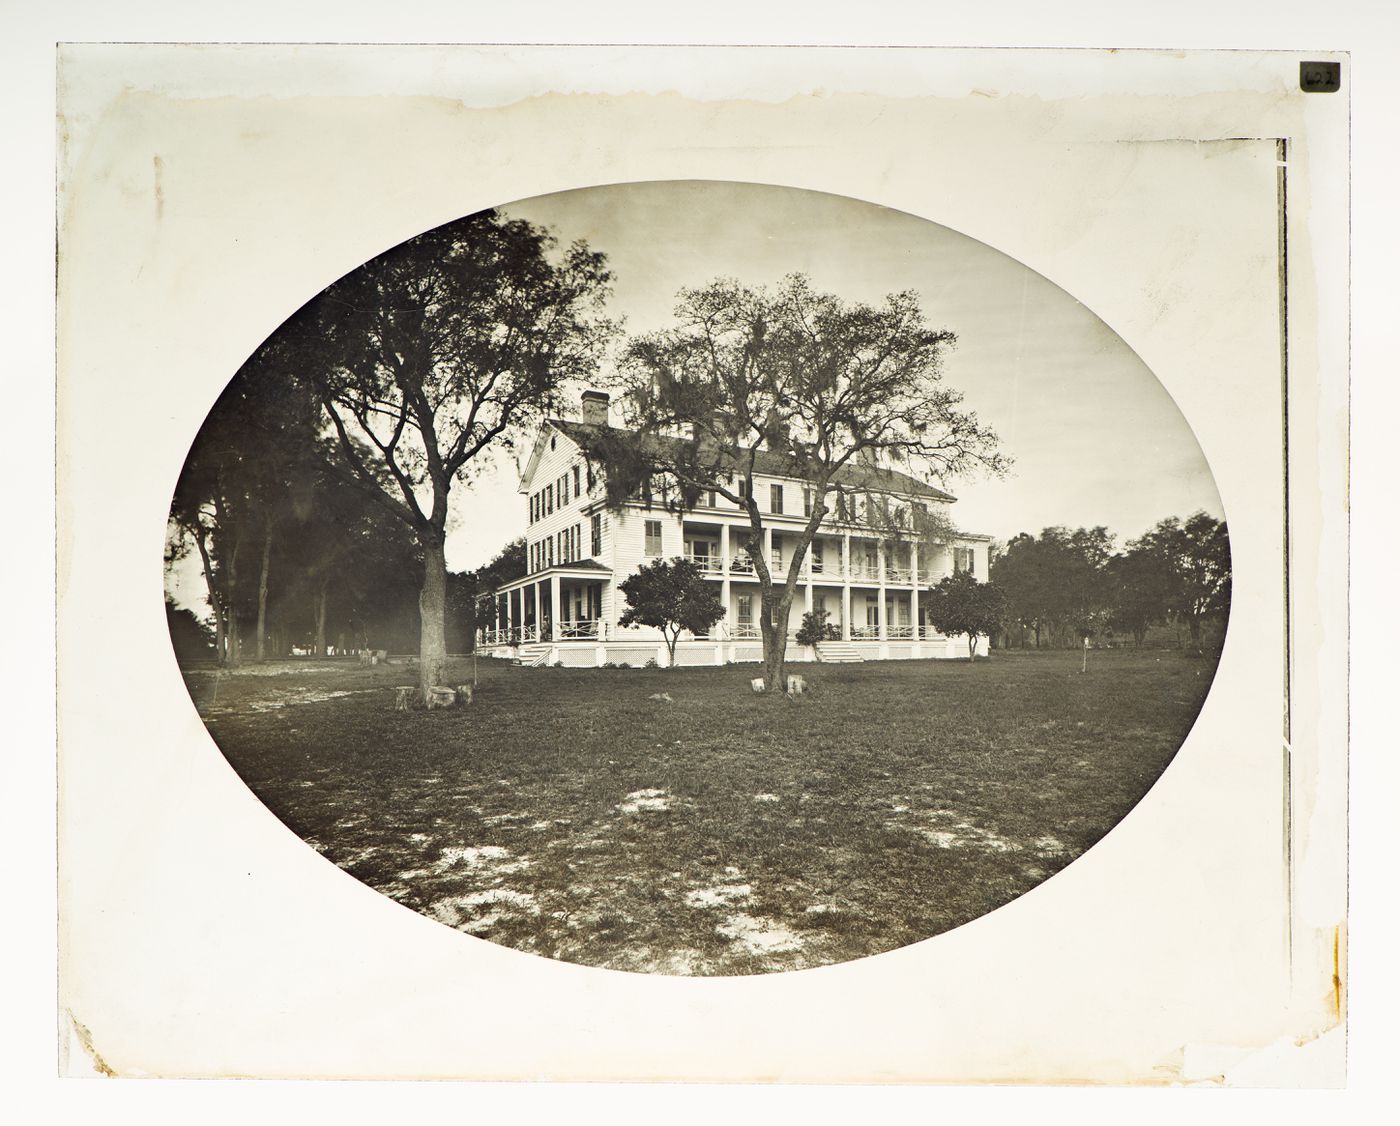 View of three story white frame house, (possibly) St. Ausgustine, Florida, United Staes of America